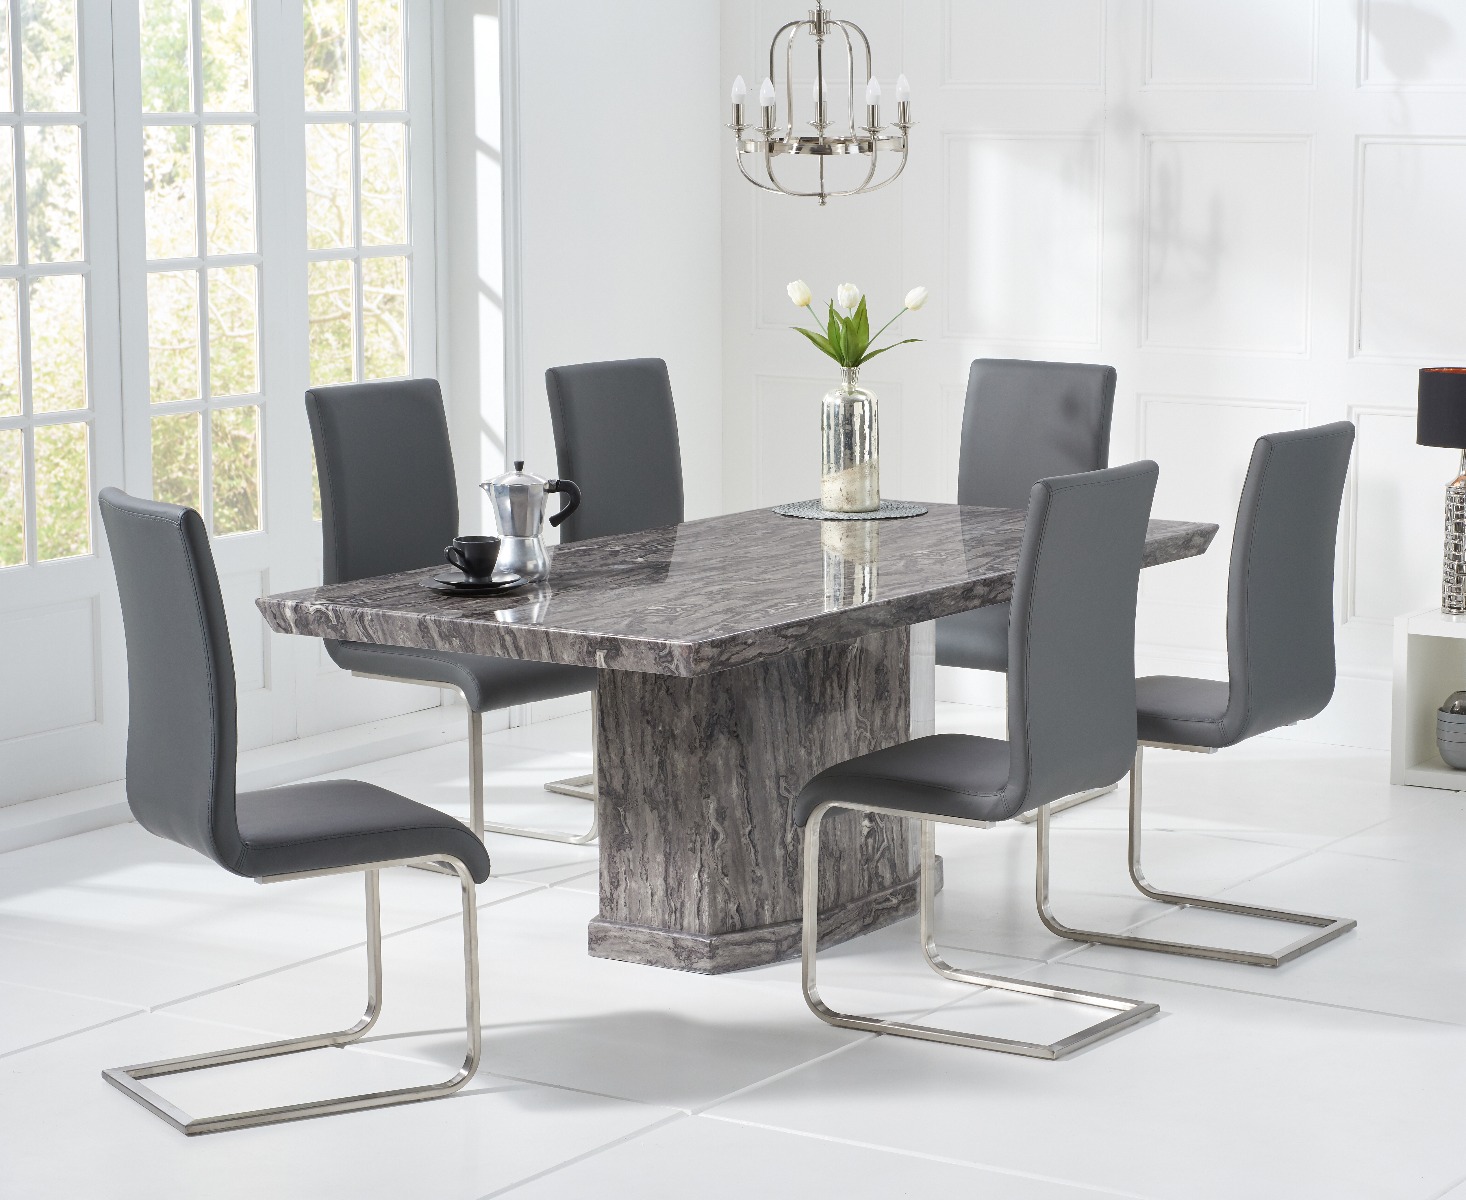 Carvelle 200cm Grey Pedestal Marble Dining Table With 6 Grey Austin Chairs